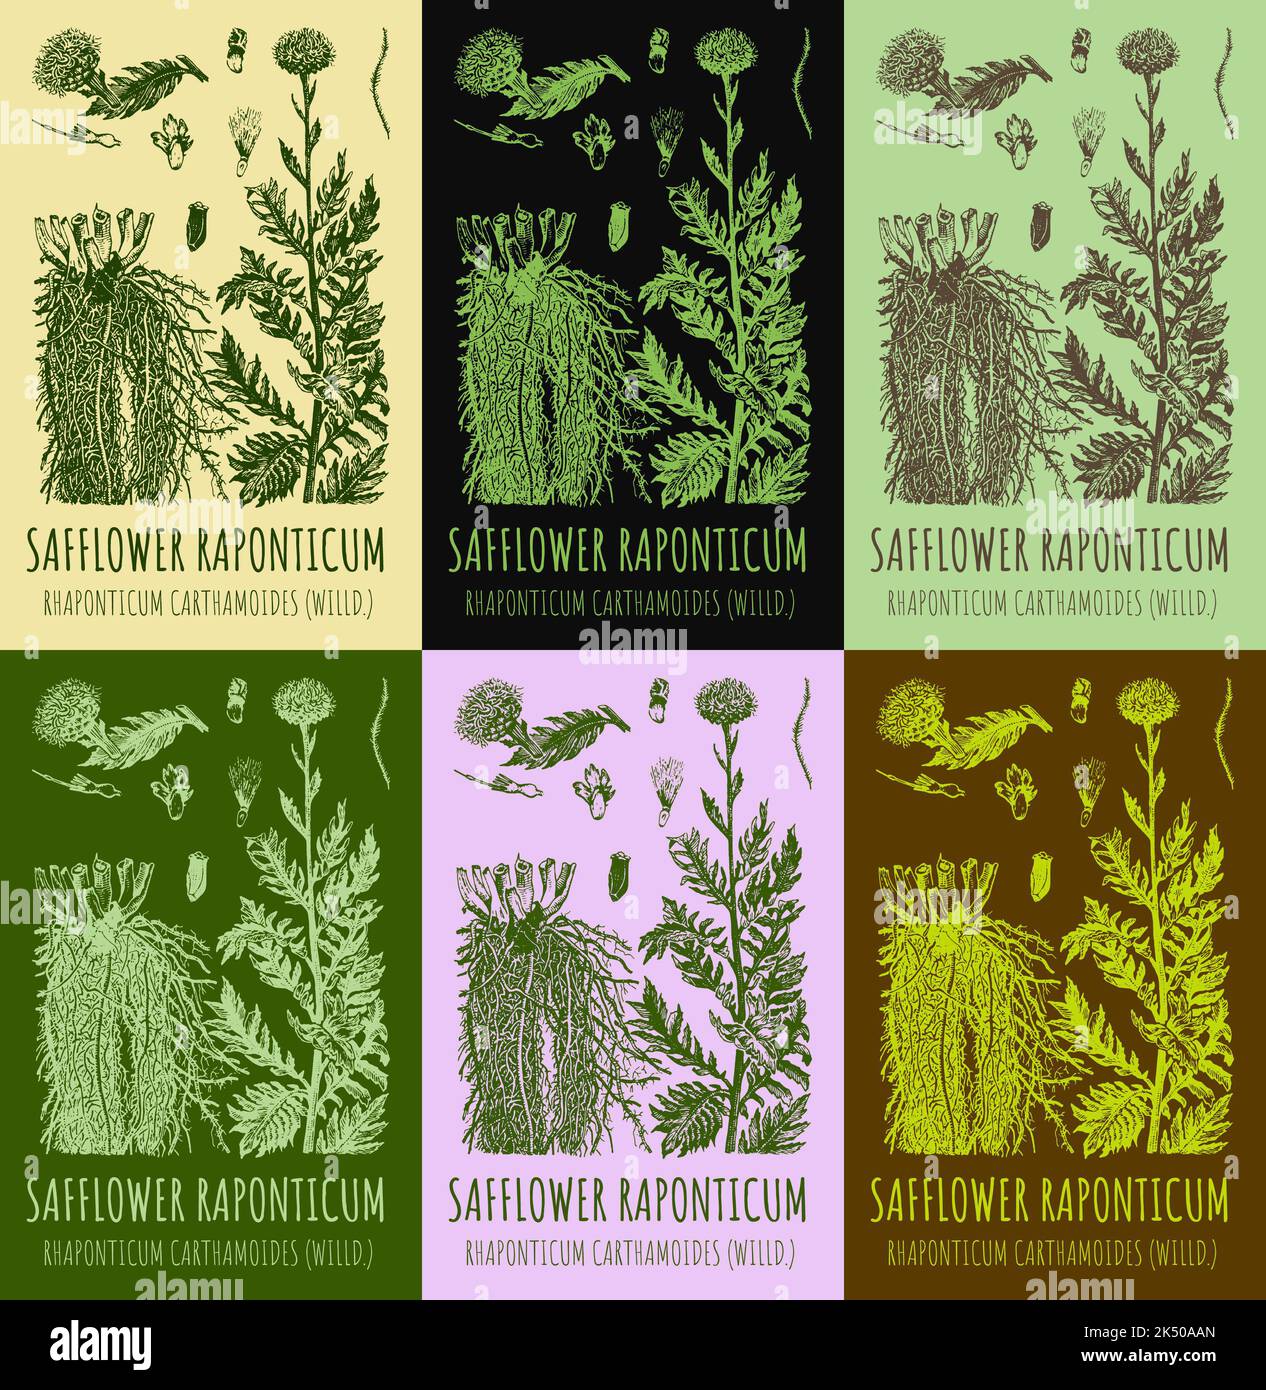 Set of vector drawings of SAFFLOWER RAPONTICUM in different colors. Hand drawn illustration. Latin name Rhaponticum carthamoides. Stock Photo